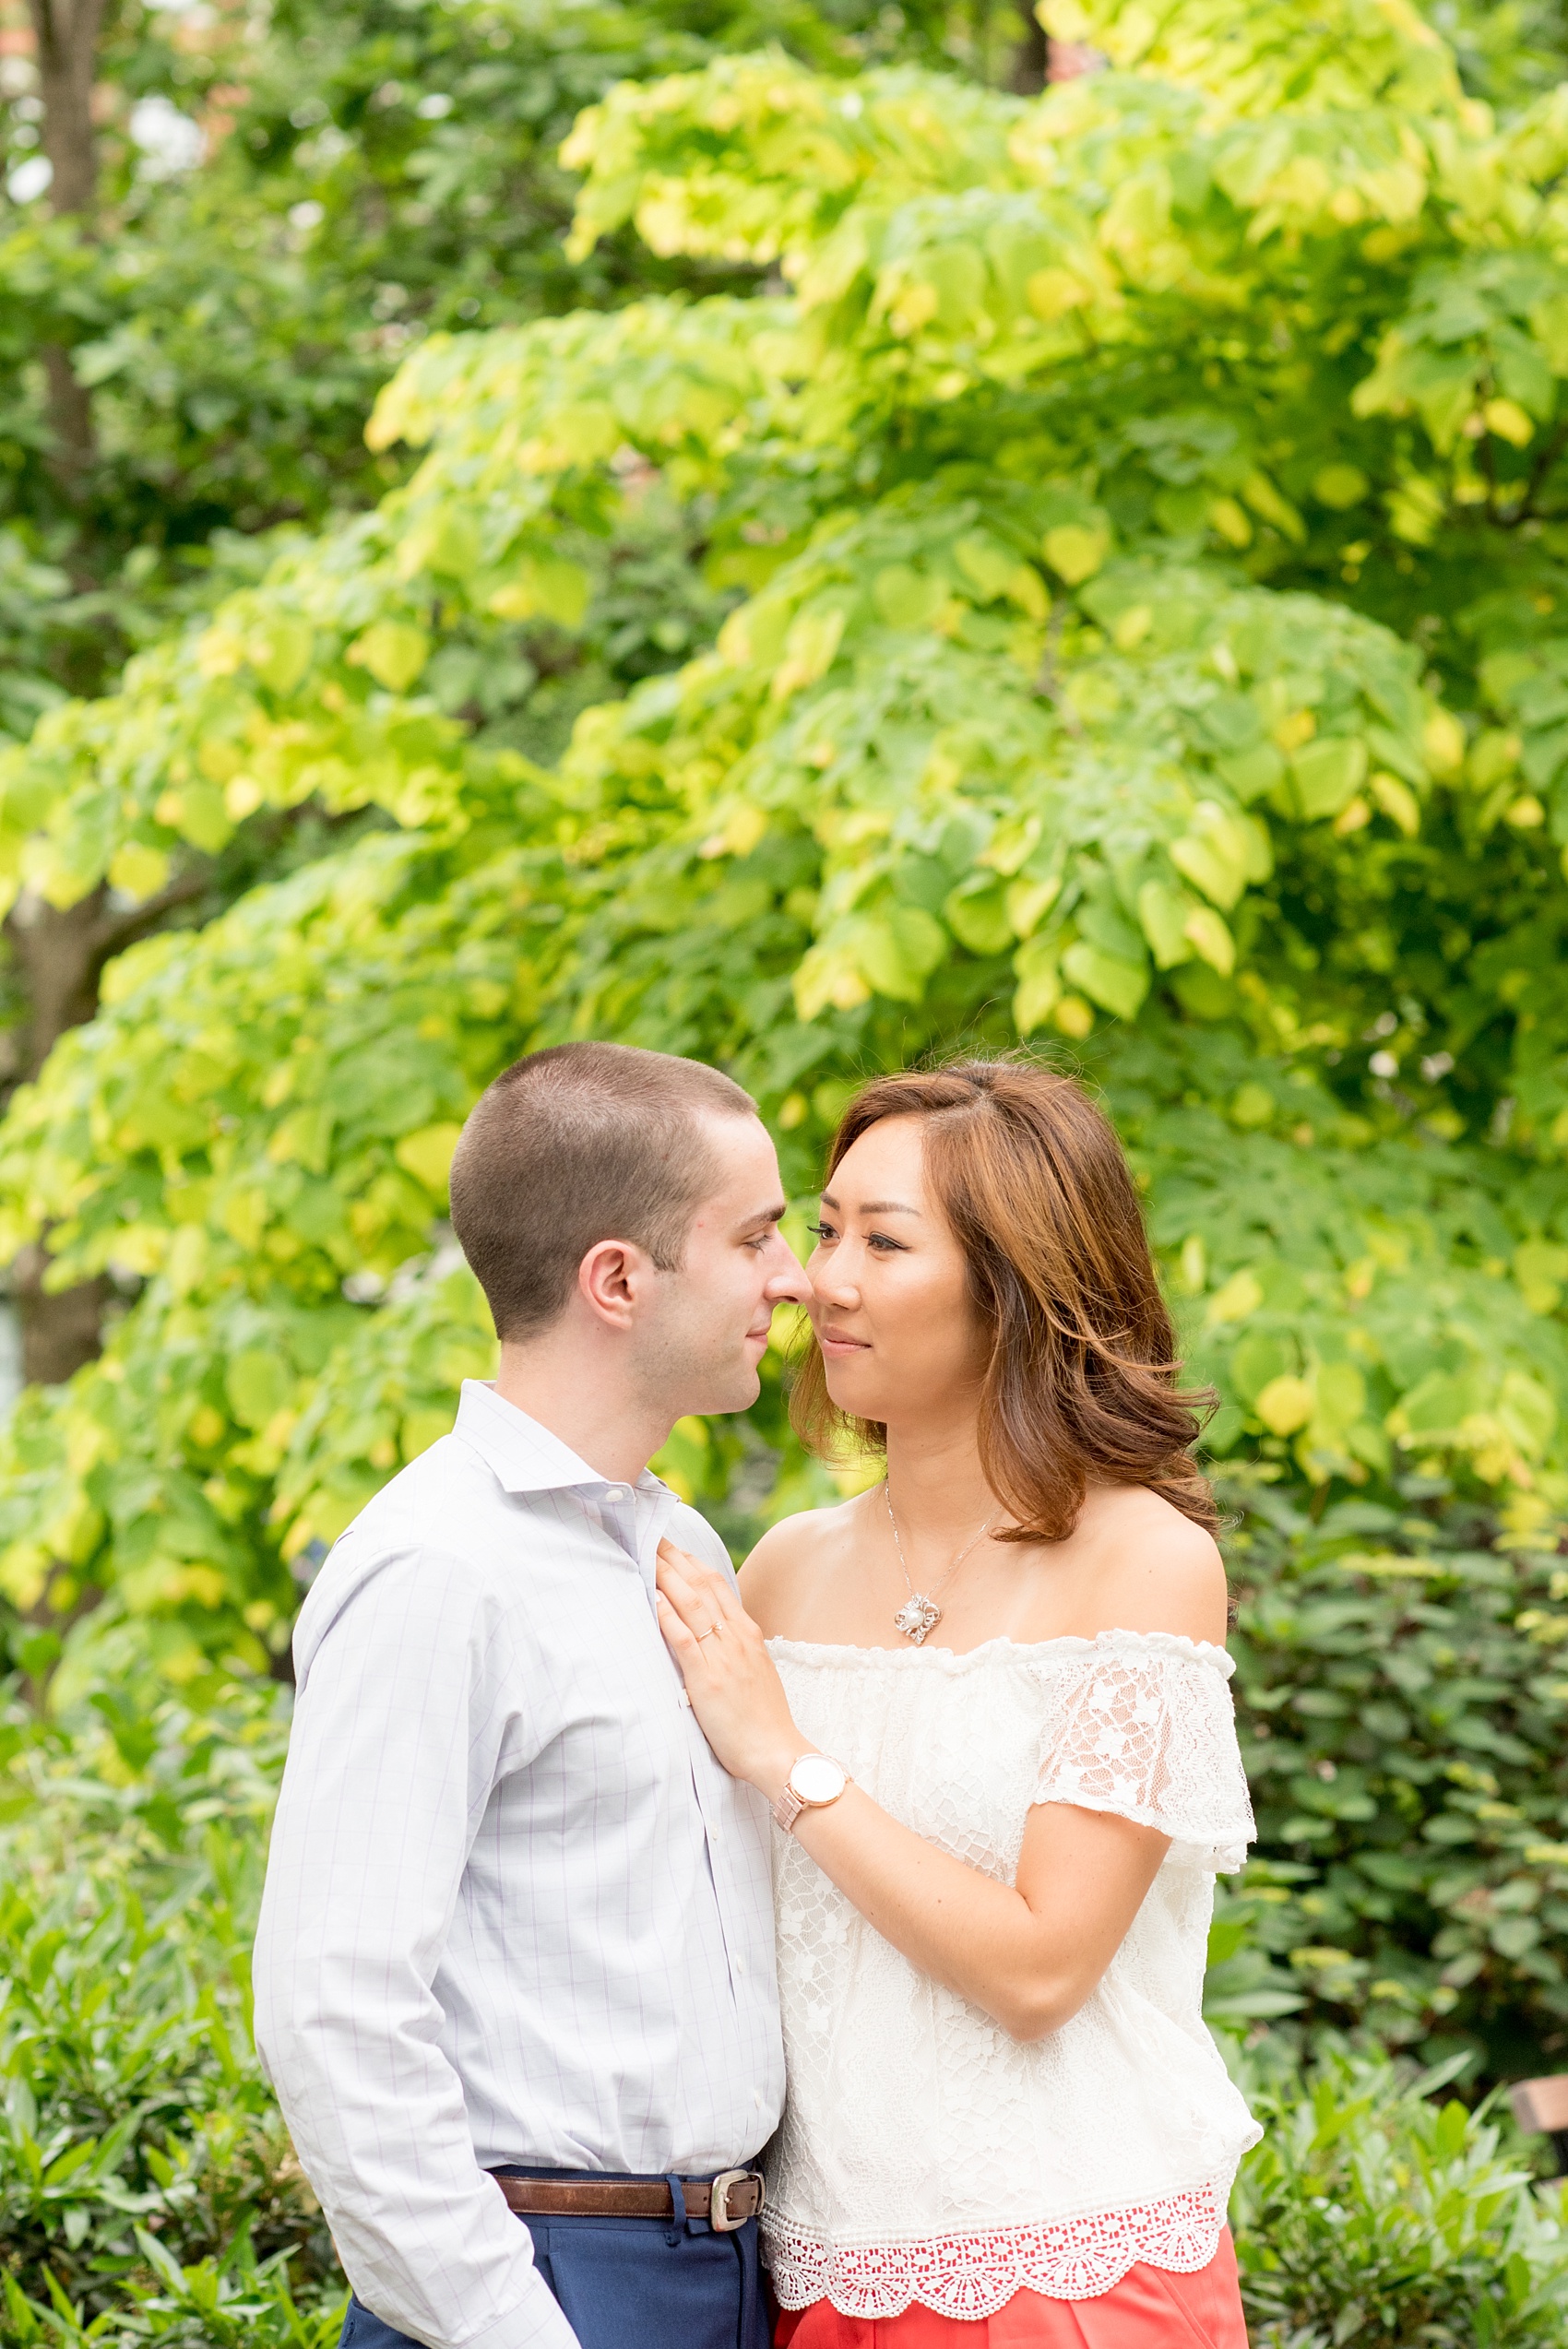 Mikkel Paige Photography photos of a Madison Square Park engagement session in NYC during spring. The bride wore an off-the-shoulder white lace top.